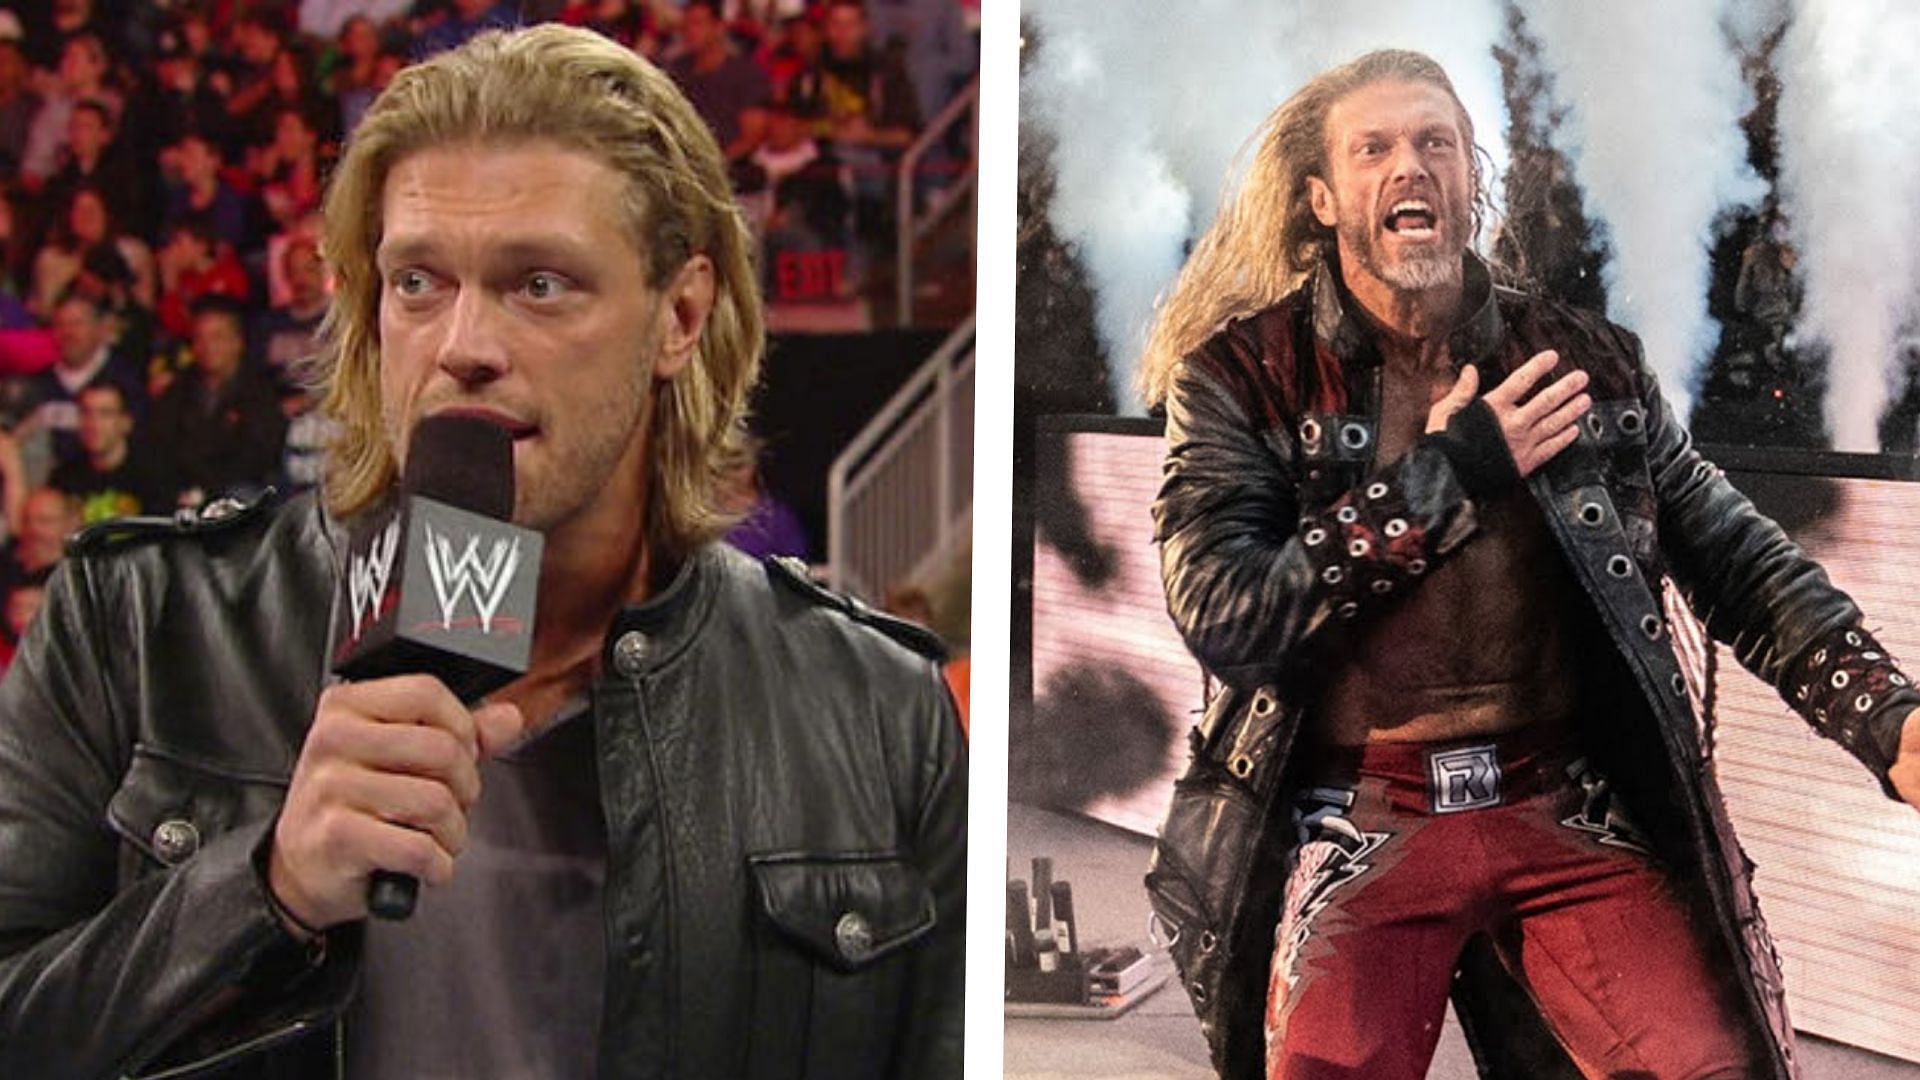 Edge was forced to retire from WWE in 2011